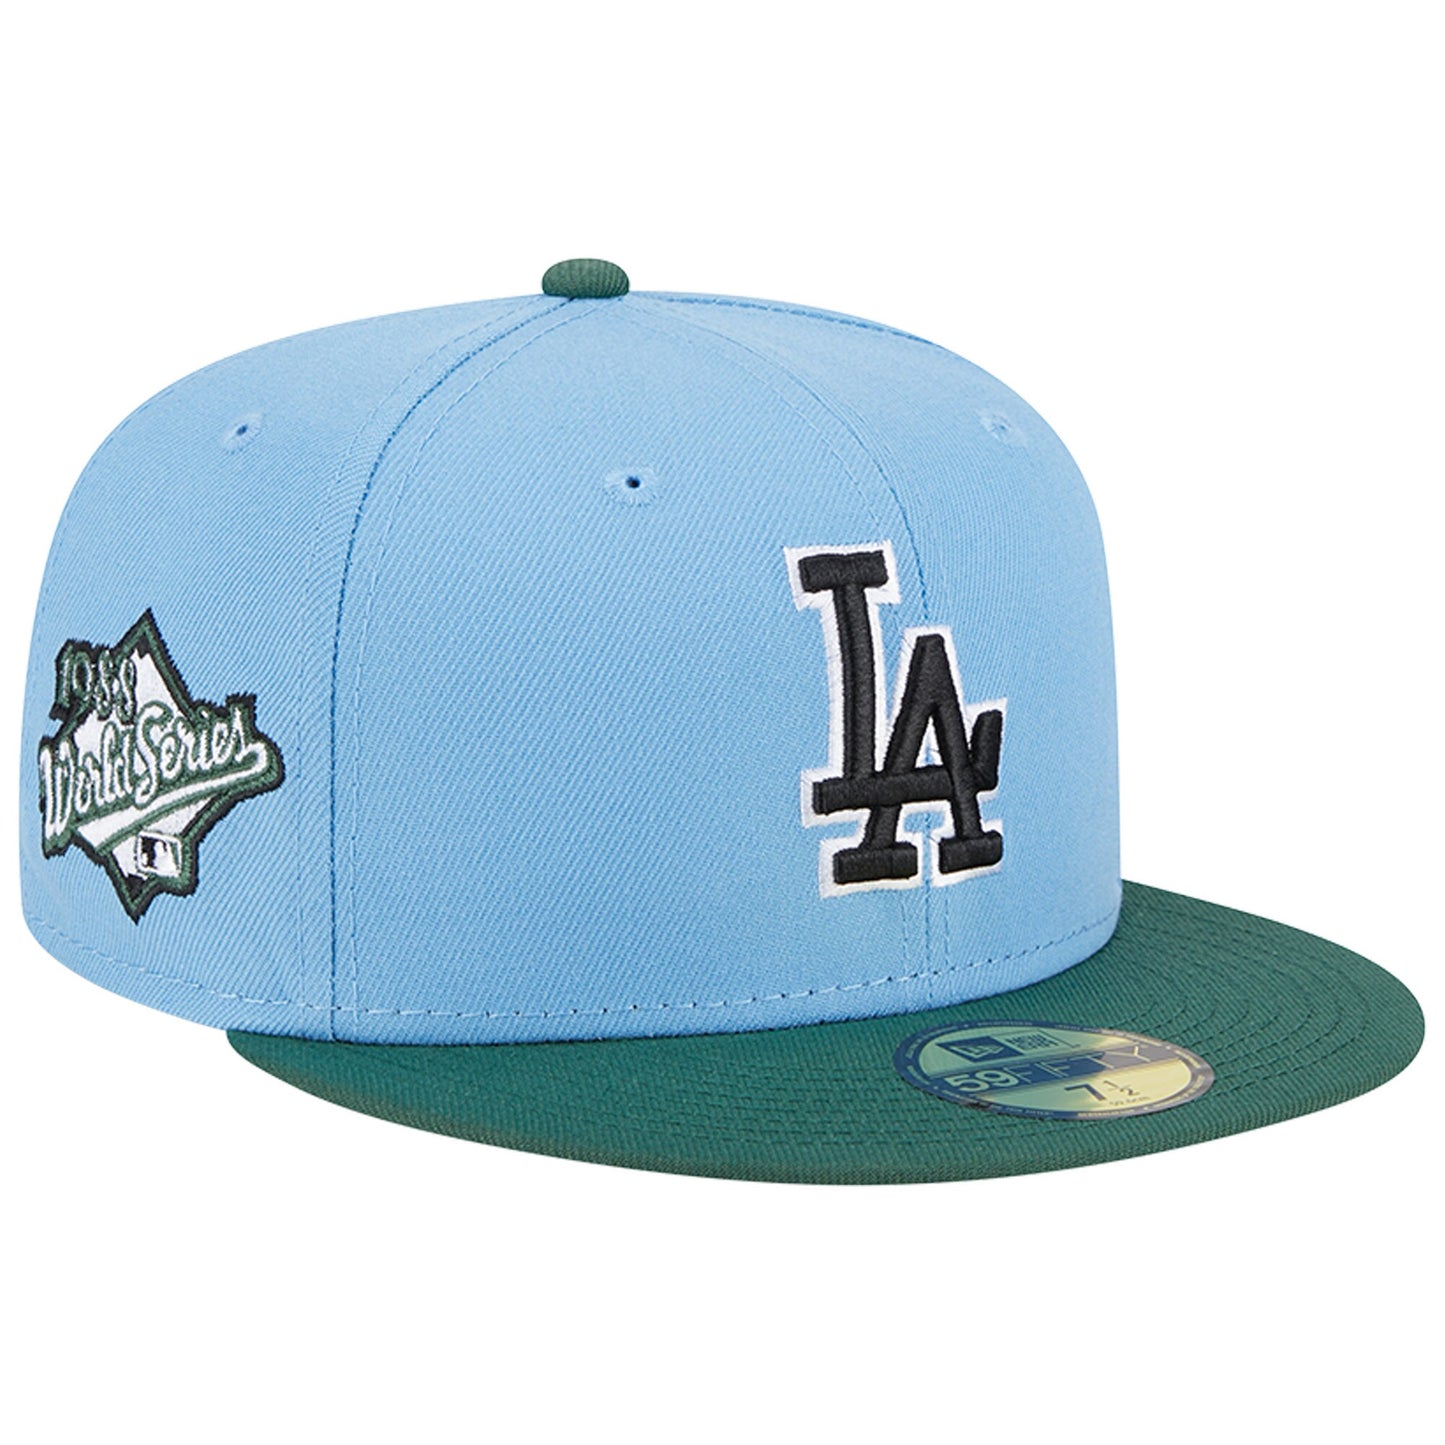 Los Angeles Dodgers New Era 1988 World Series 59FIFTY Fitted Hat - Sky Blue/Cilantro